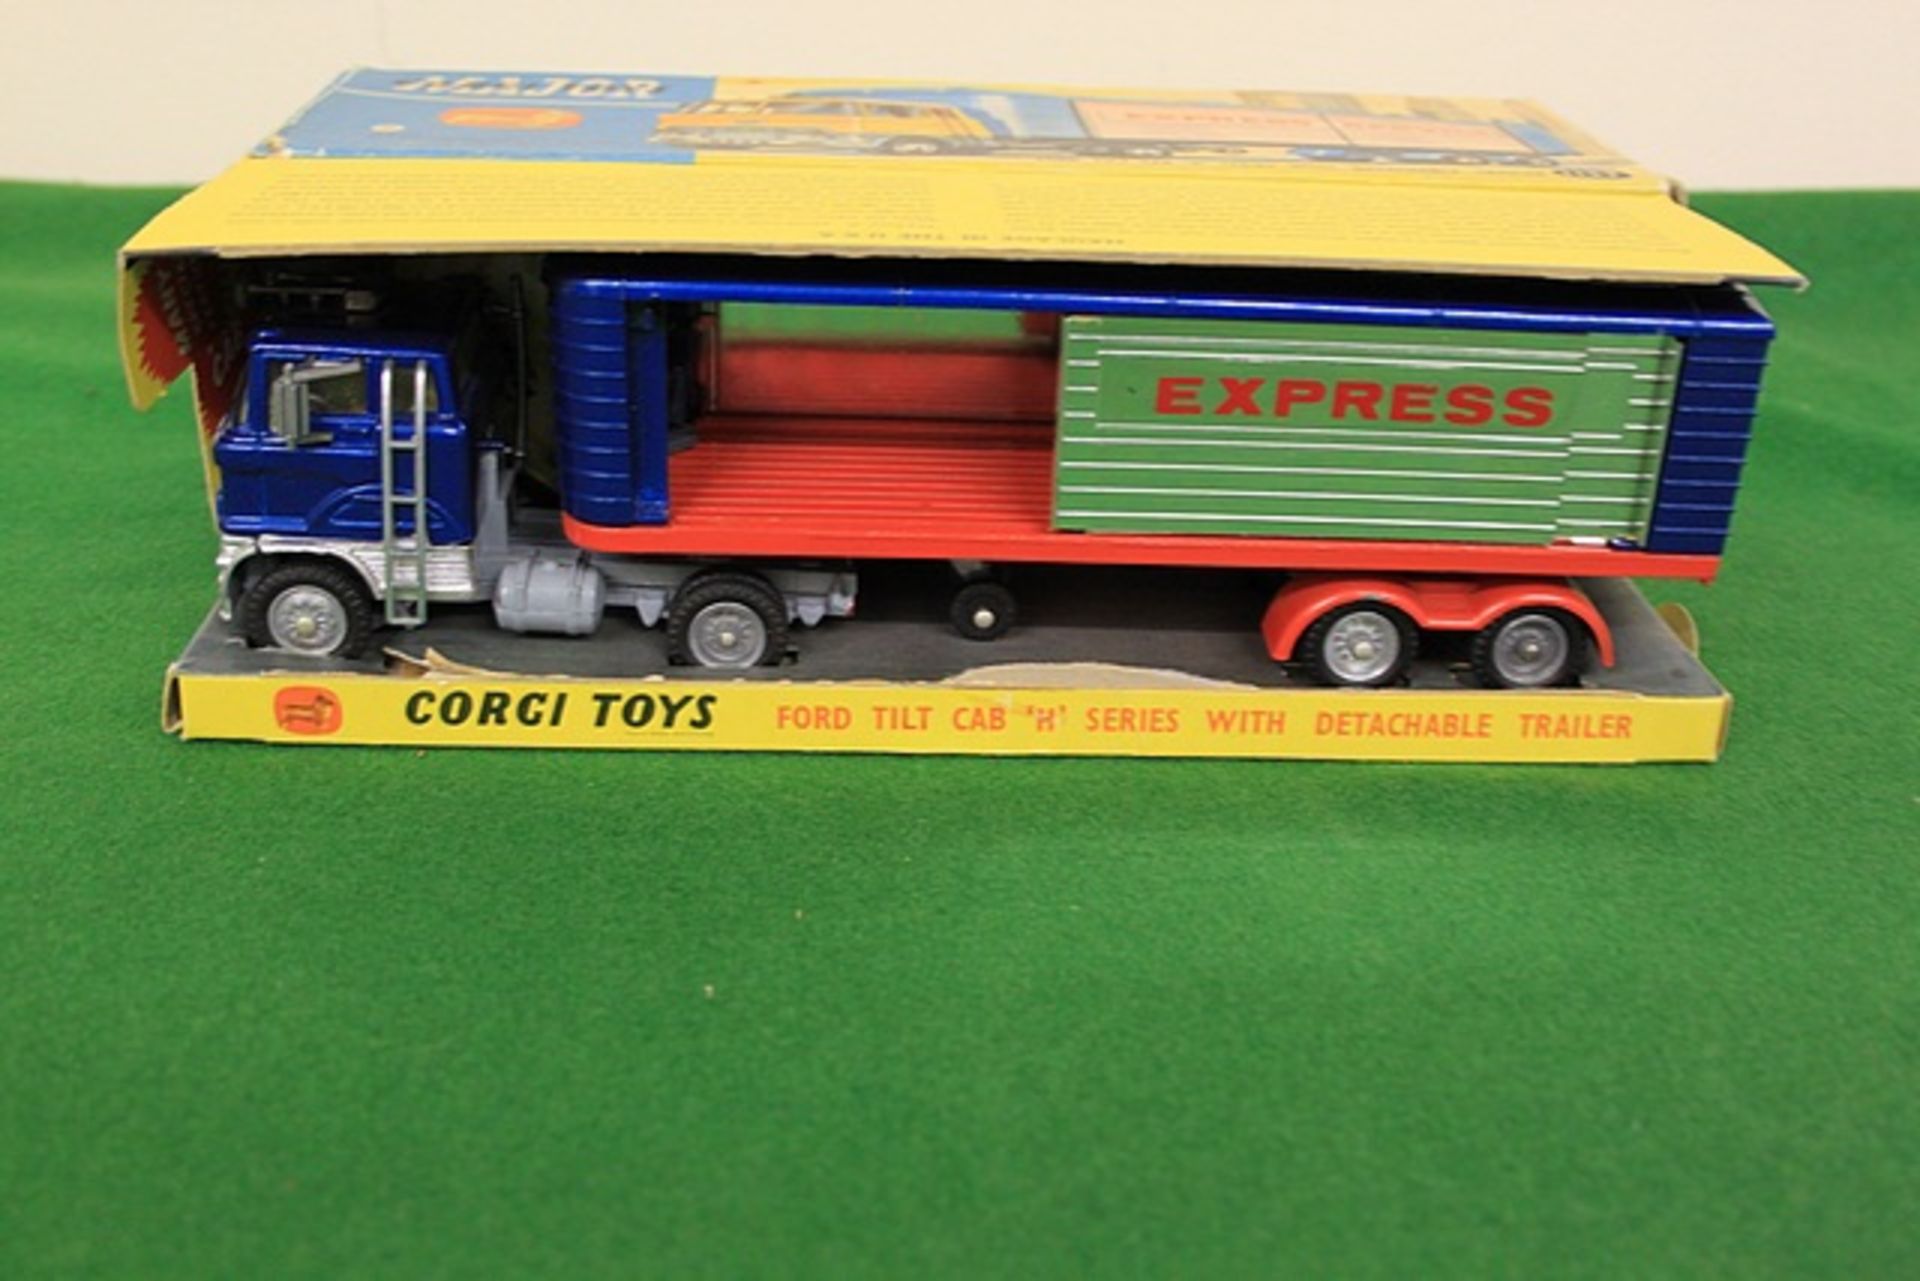 Corgi Major Toys # 1137 Diecast Ford Tilt Cab H-Series With Detachable Trailer Complete With Box - Image 2 of 2